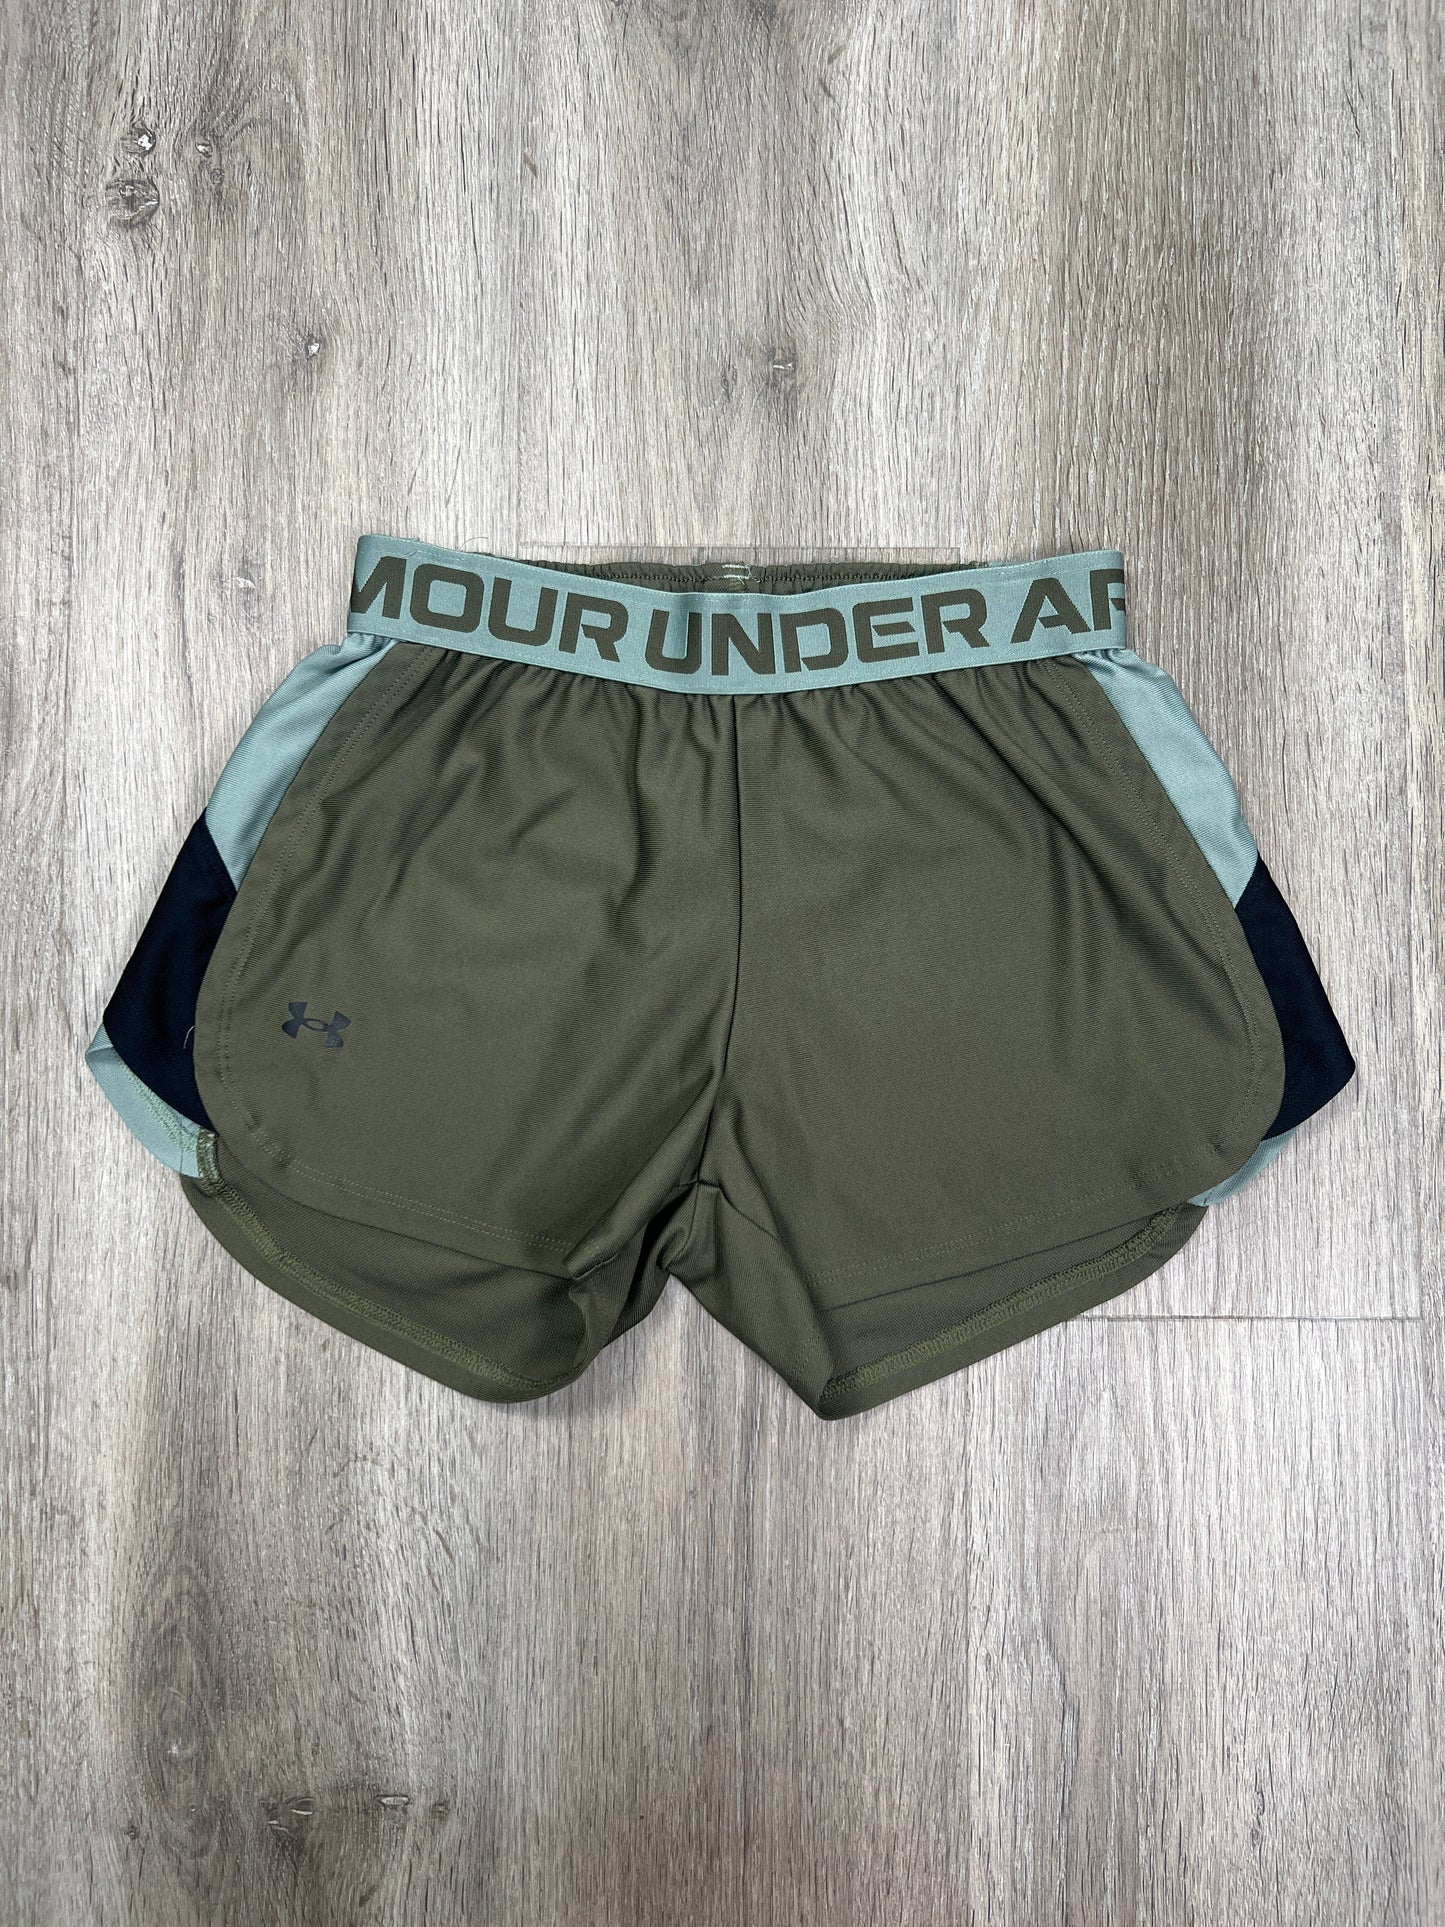 Green Athletic Shorts Under Armour , Size Xs